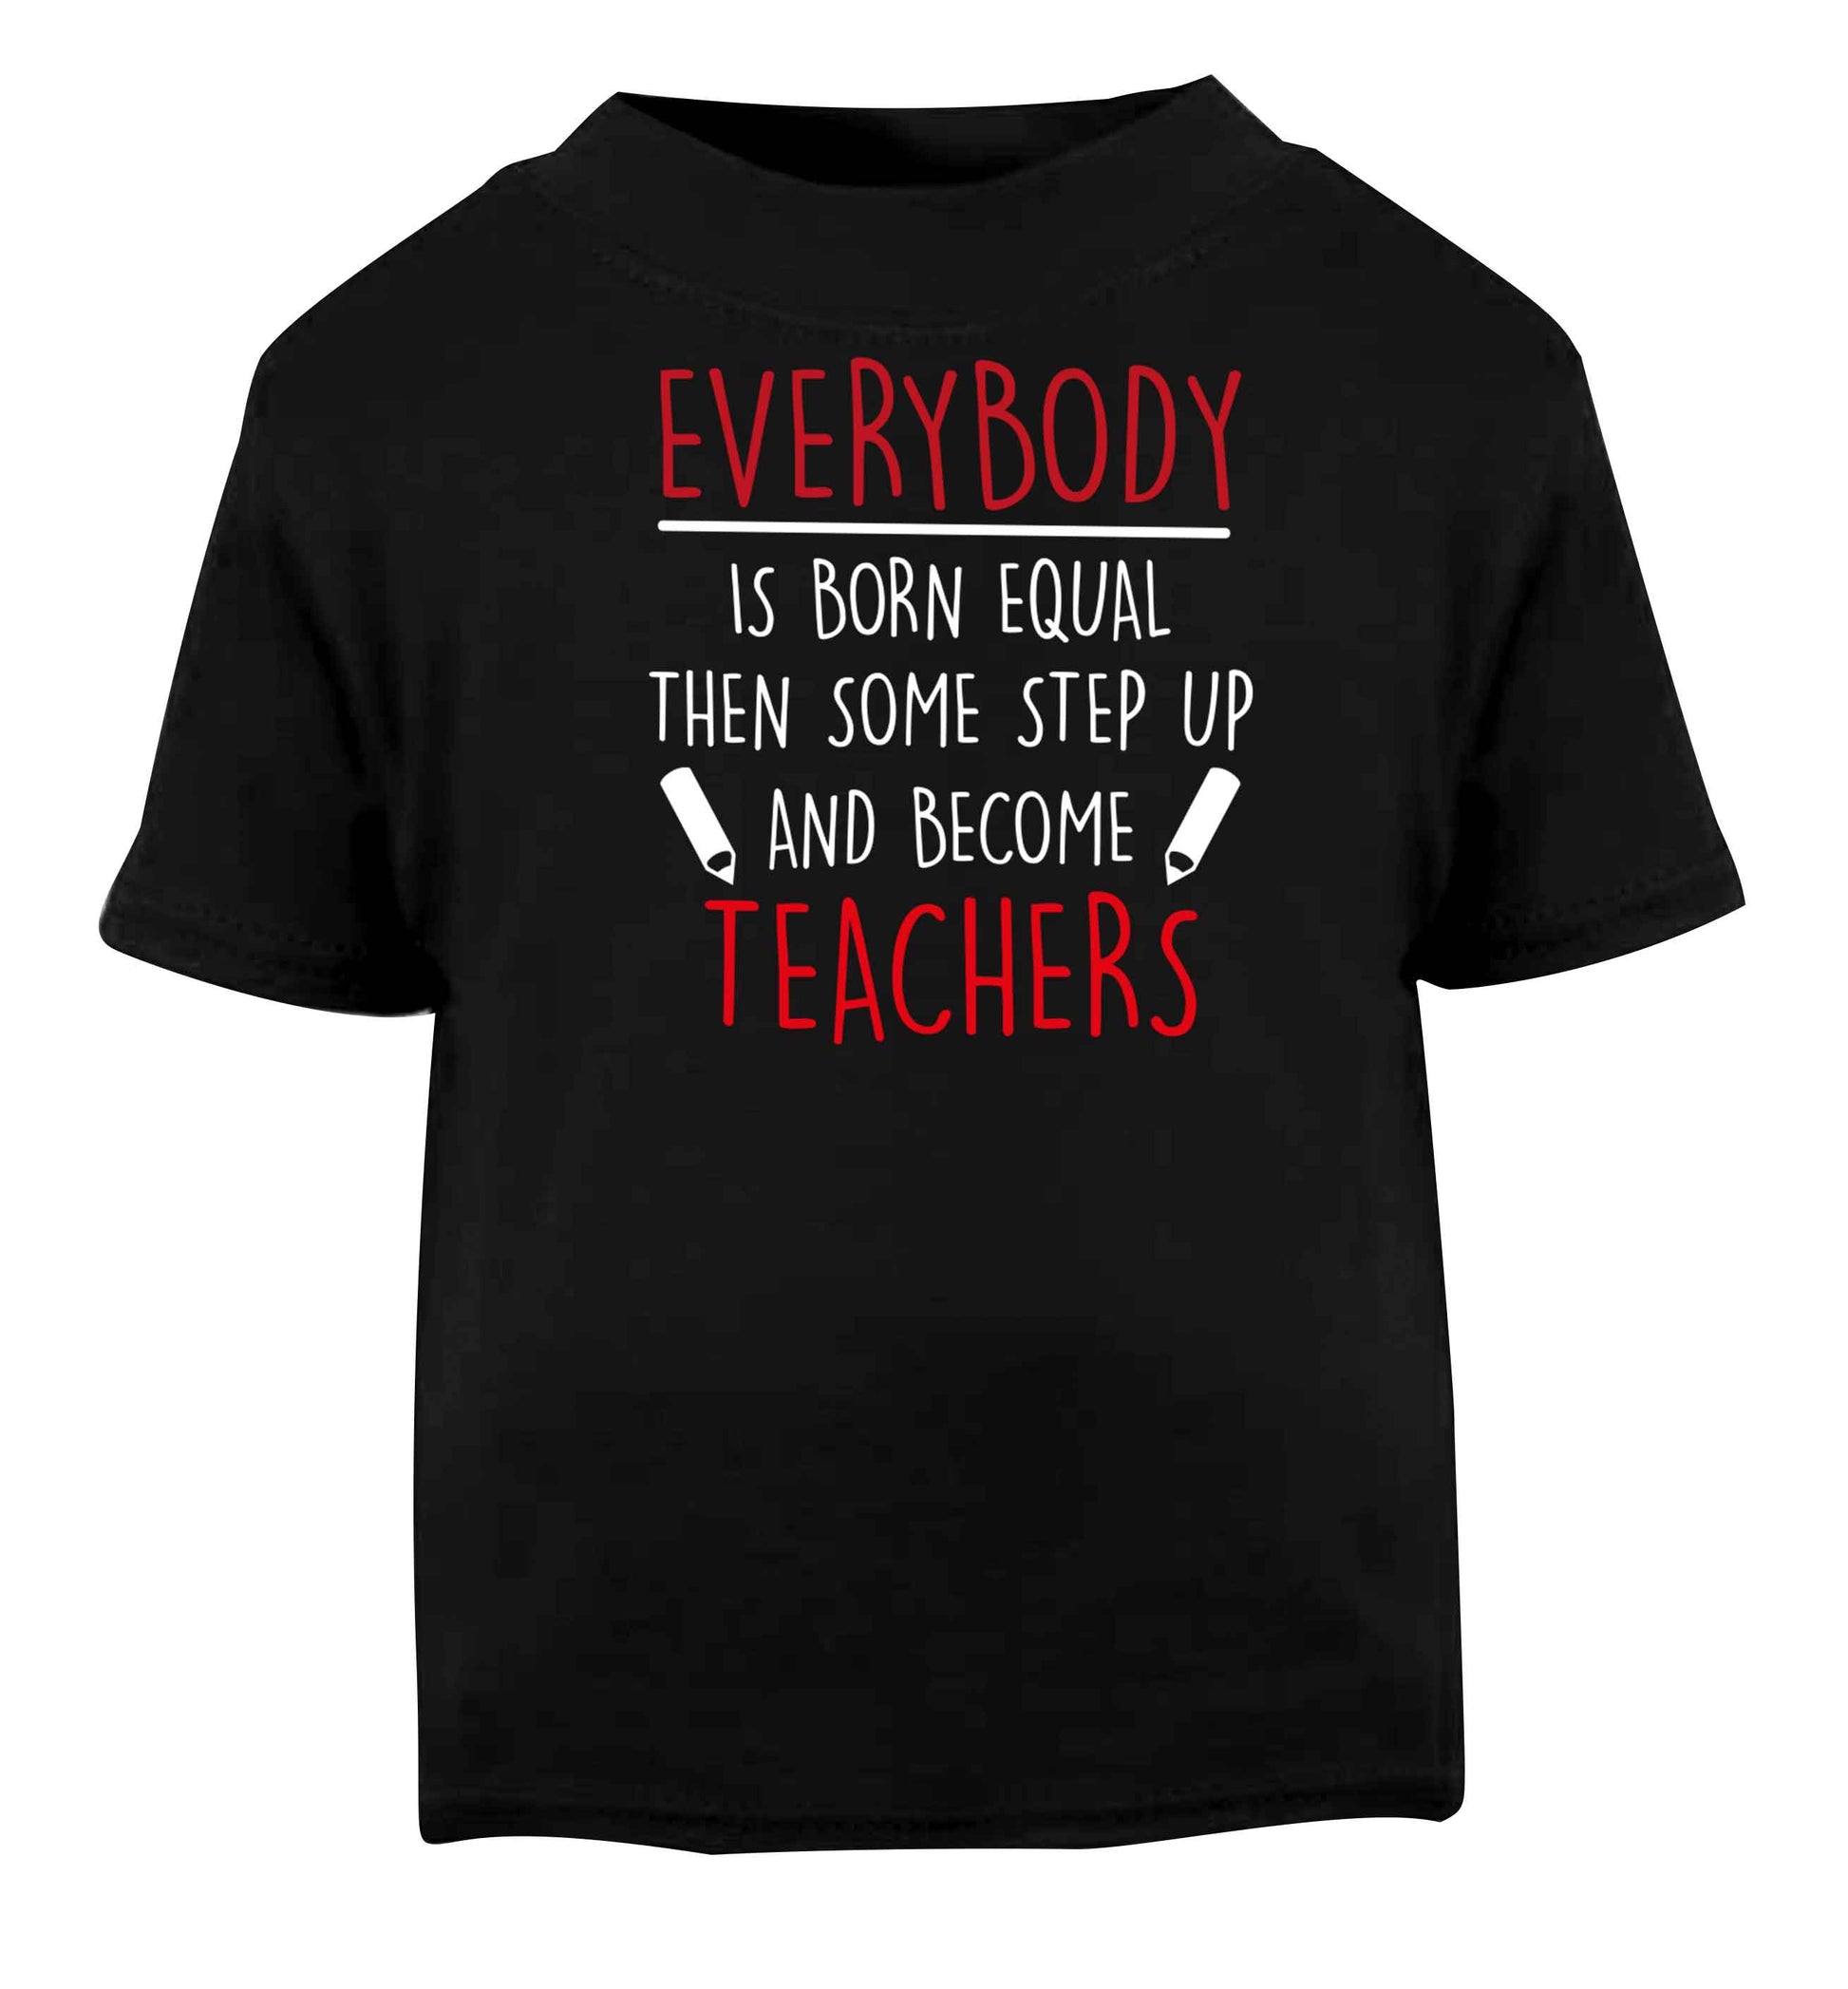 Everybody is born equal then some step up and become teachers Black baby toddler Tshirt 2 years